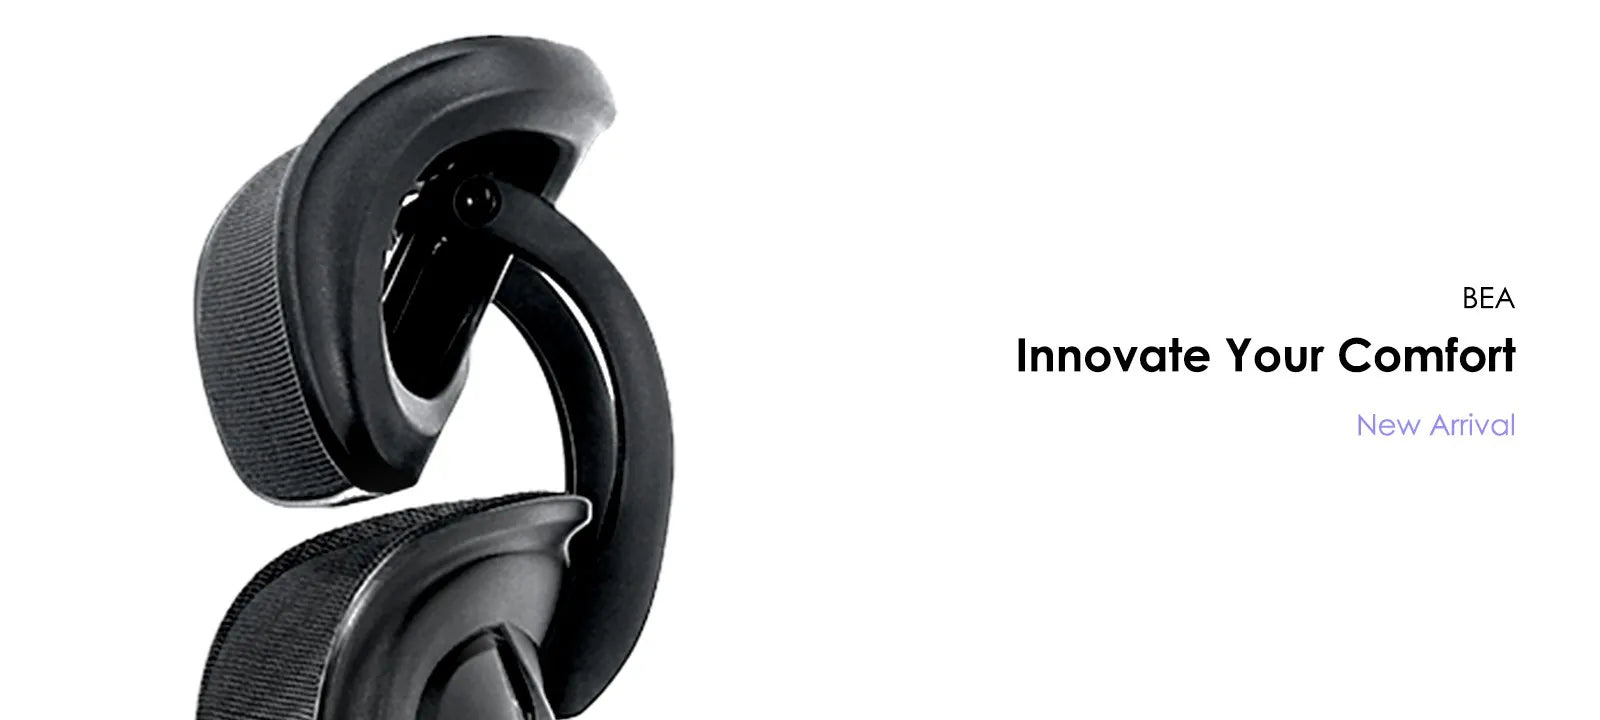 Side detail of BEA ergonomic office chair's armrest and wheelbase with 'Innovate Your Comfort' slogan.